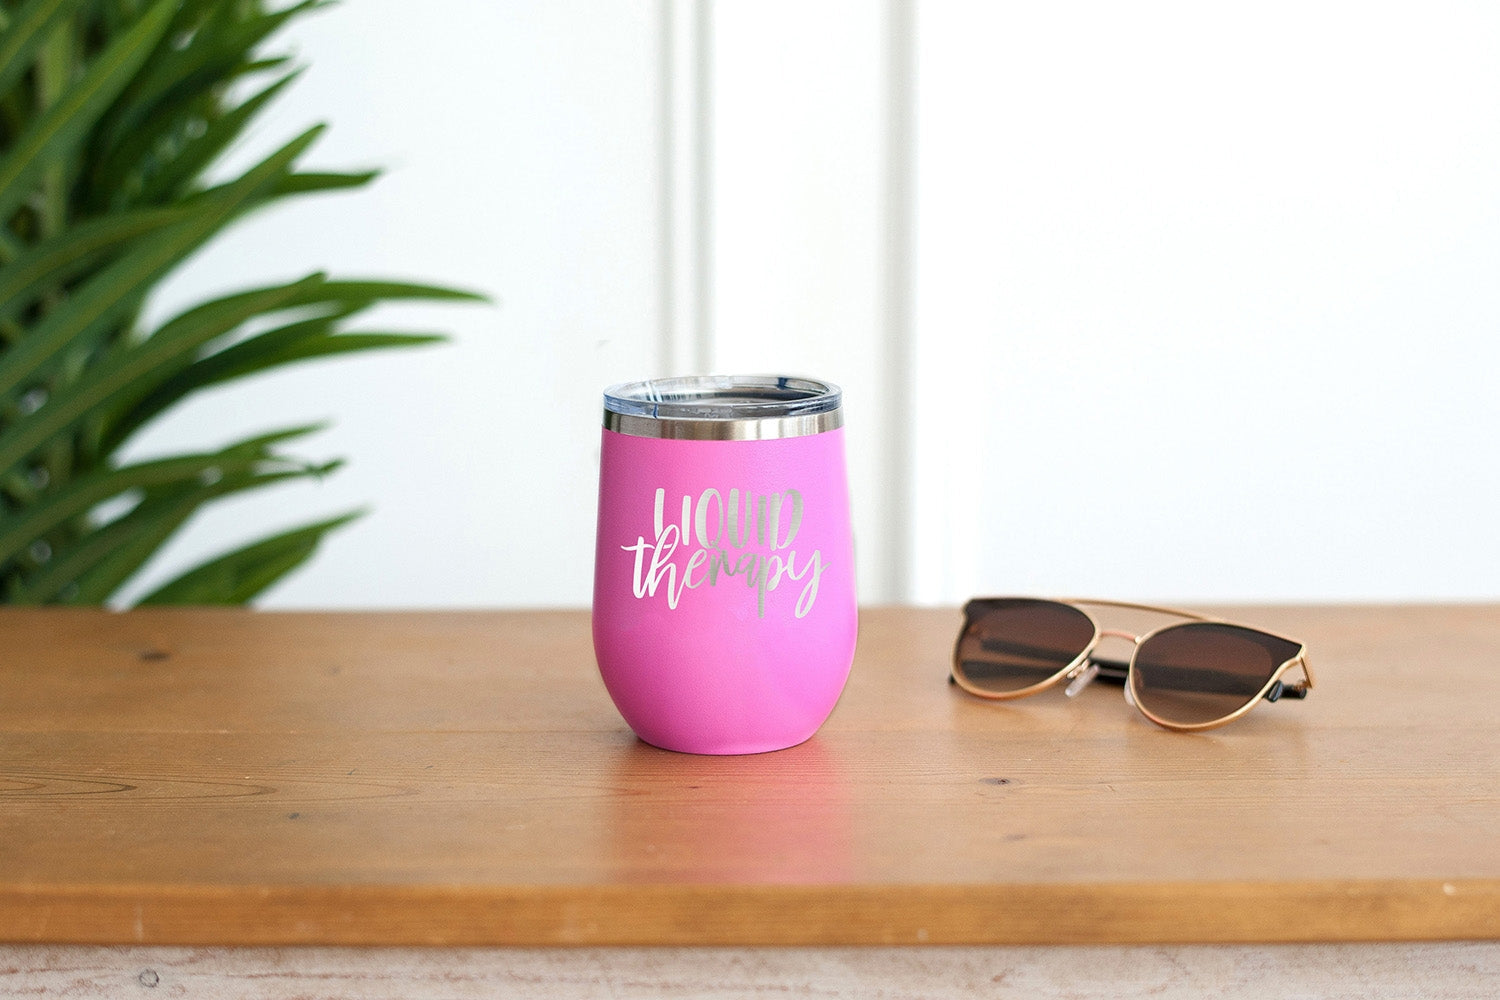 Liquid Therapy Pink 12oz Insulated Tumbler